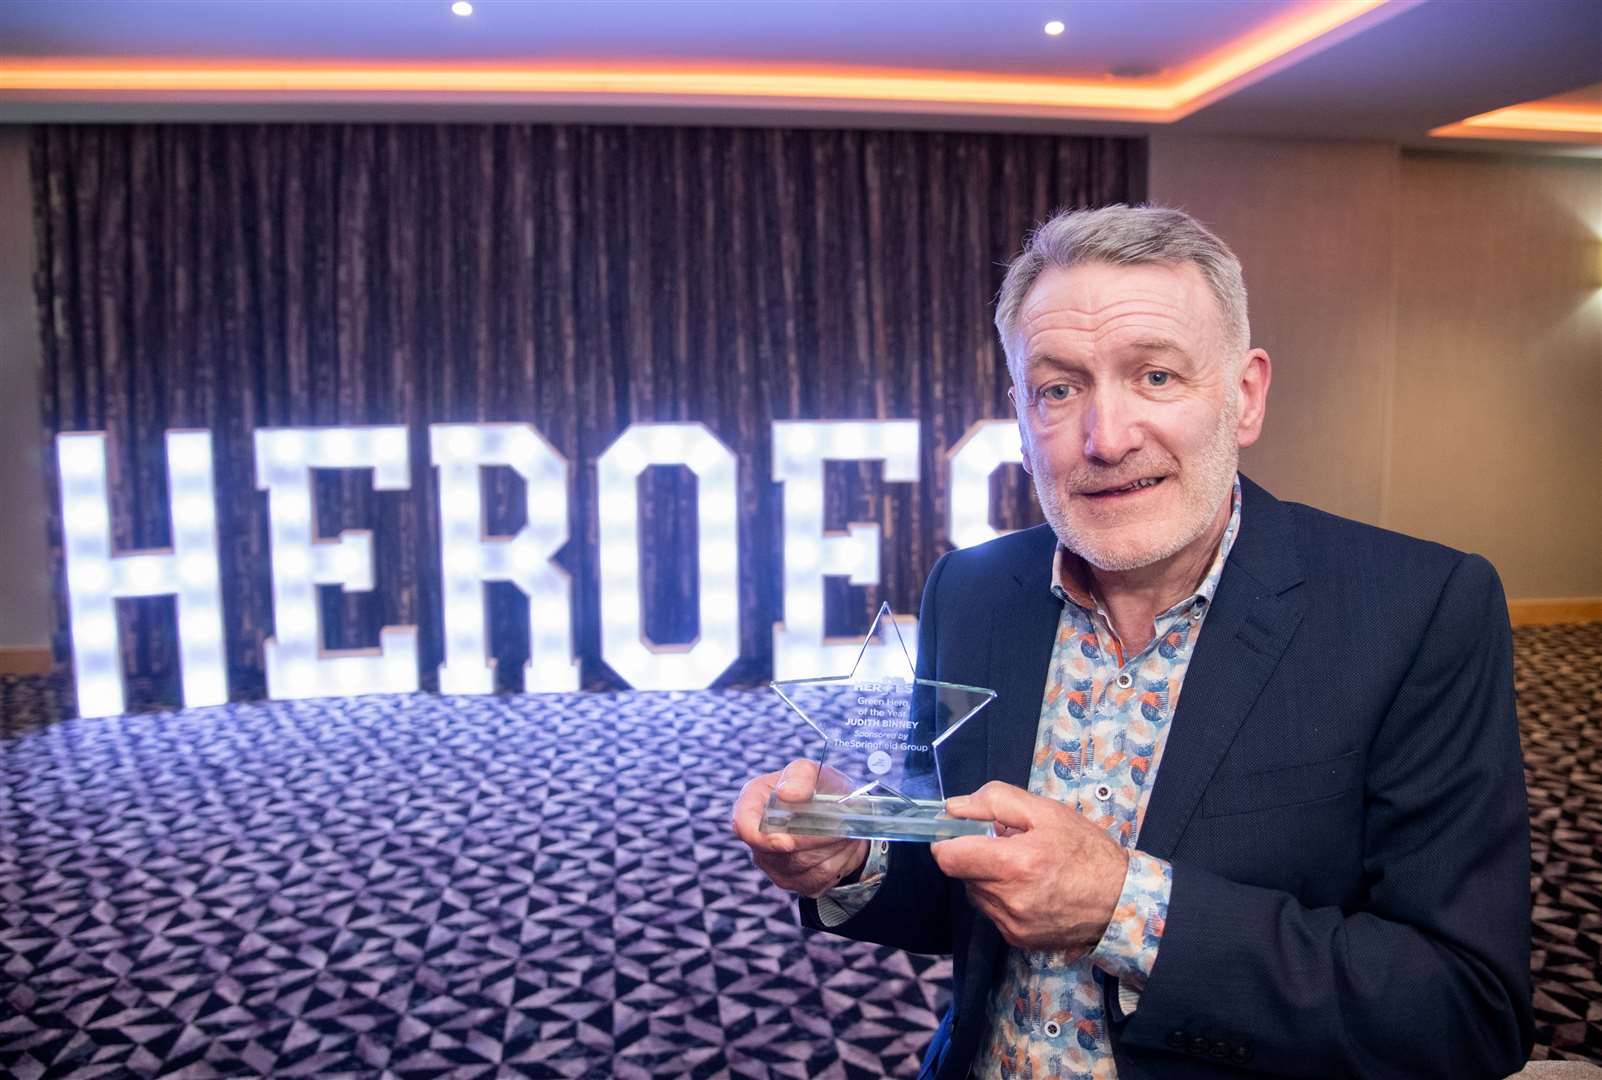 Green Hero of the Year Award - sponsored by Springfield Group - was Judith Binney - James Brander pictured who collected the award on her behalf. Picture: Daniel Forsyth.